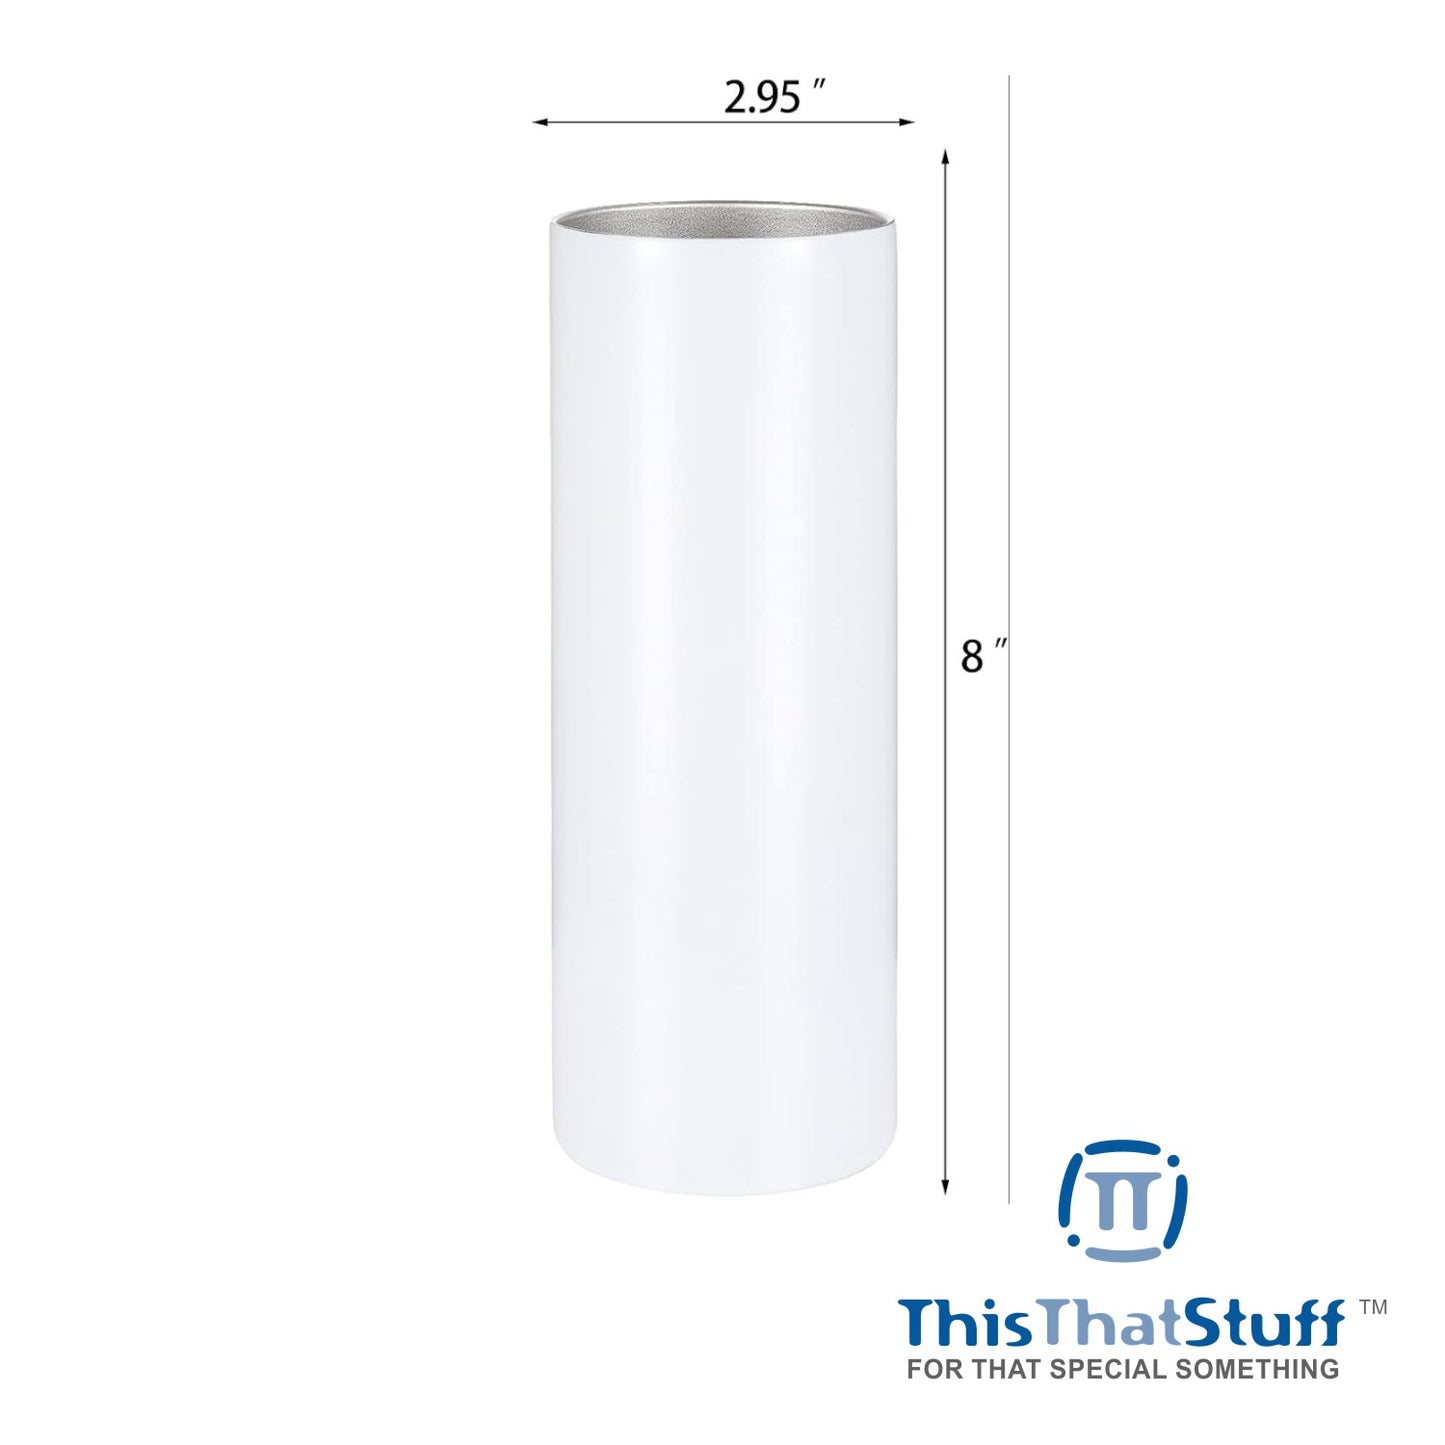 Custom Printed Straight Tumbler - 20 oz / 590 ml - Insulated double walled Stainless Steel